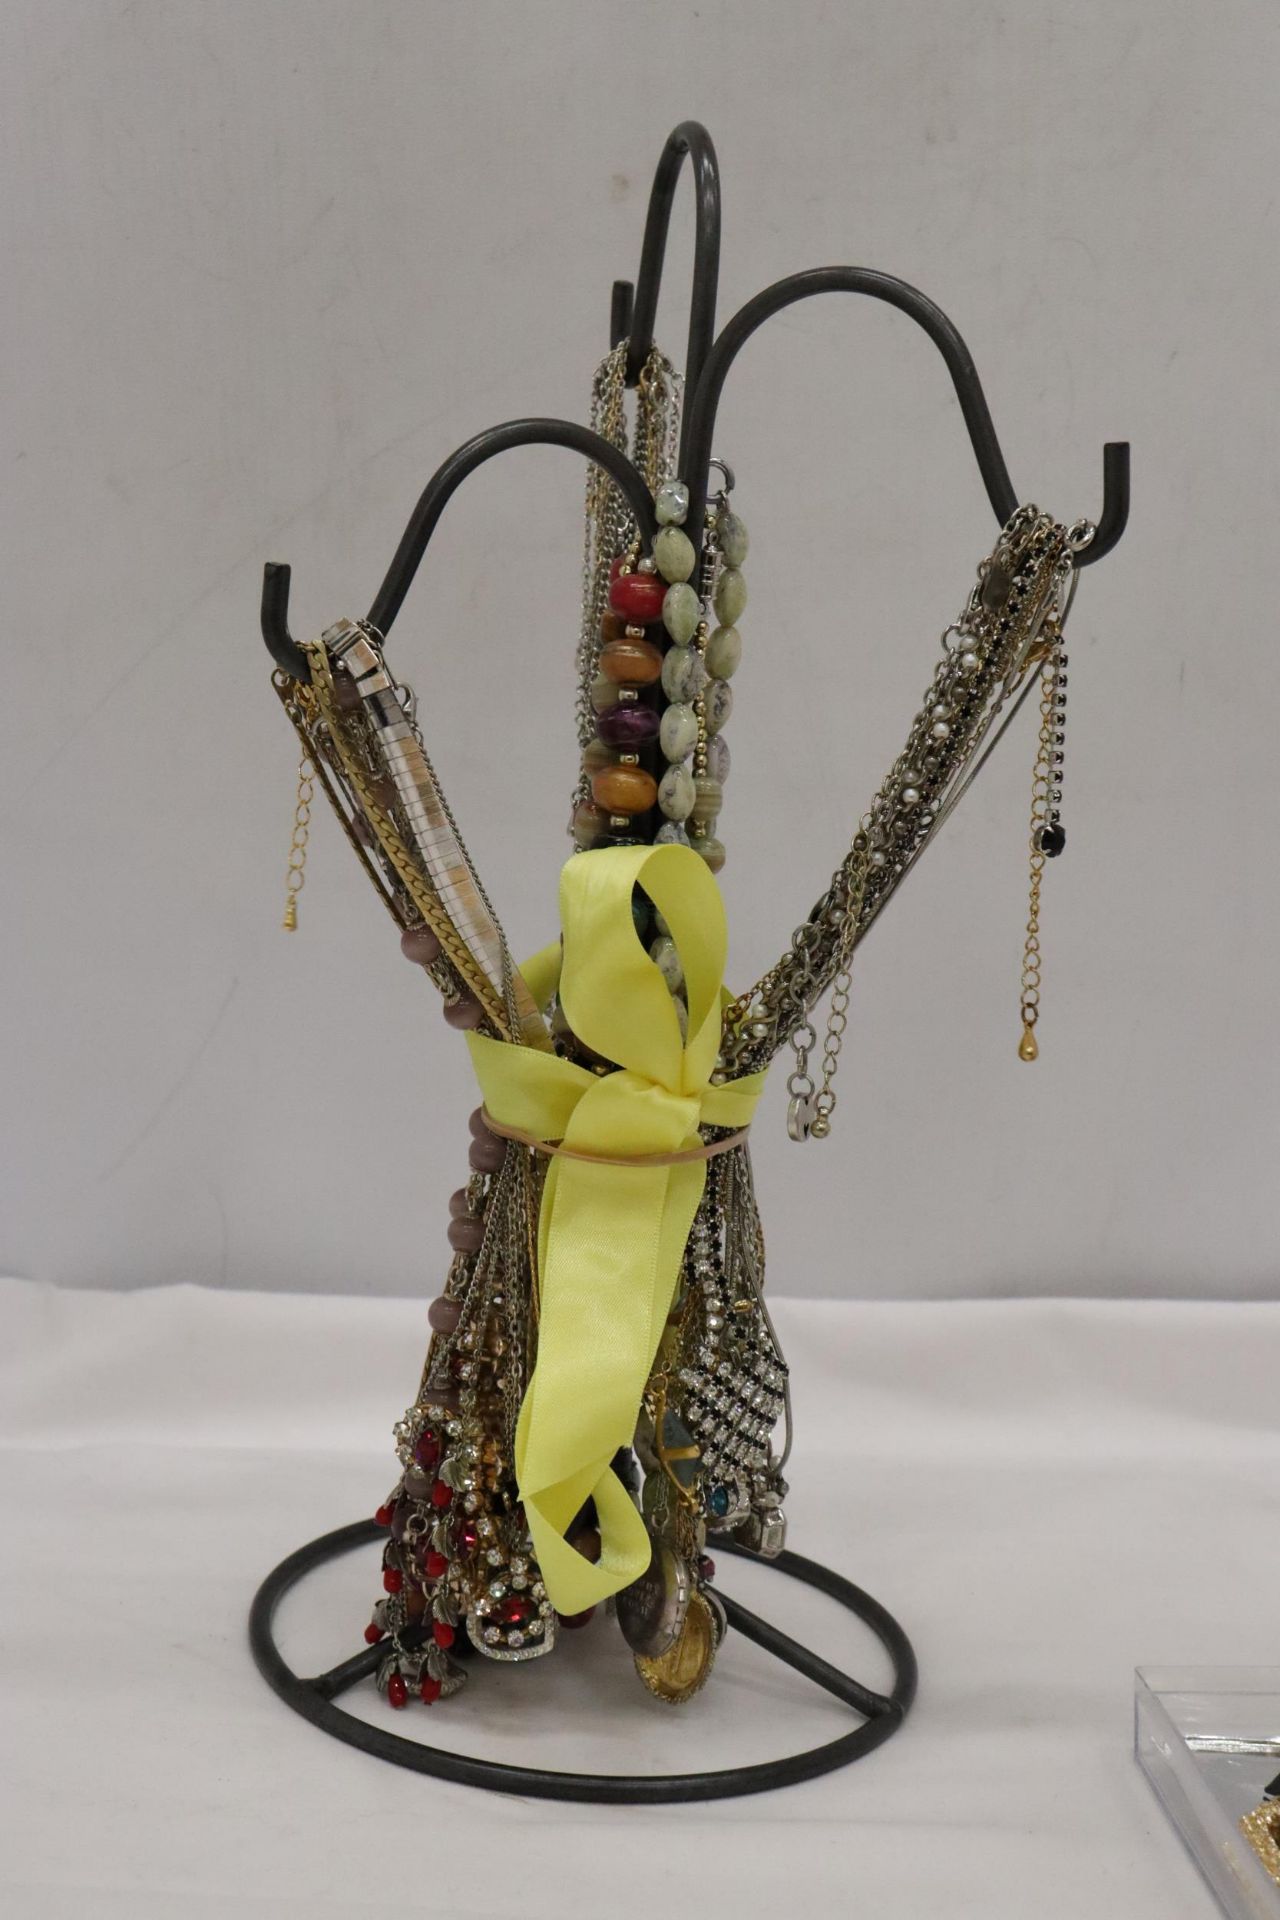 A JEWELLERY STAND WITH A QUANTITY OF NECKLACES PLUS A QUANTITY OF EARRINGS - Image 3 of 8